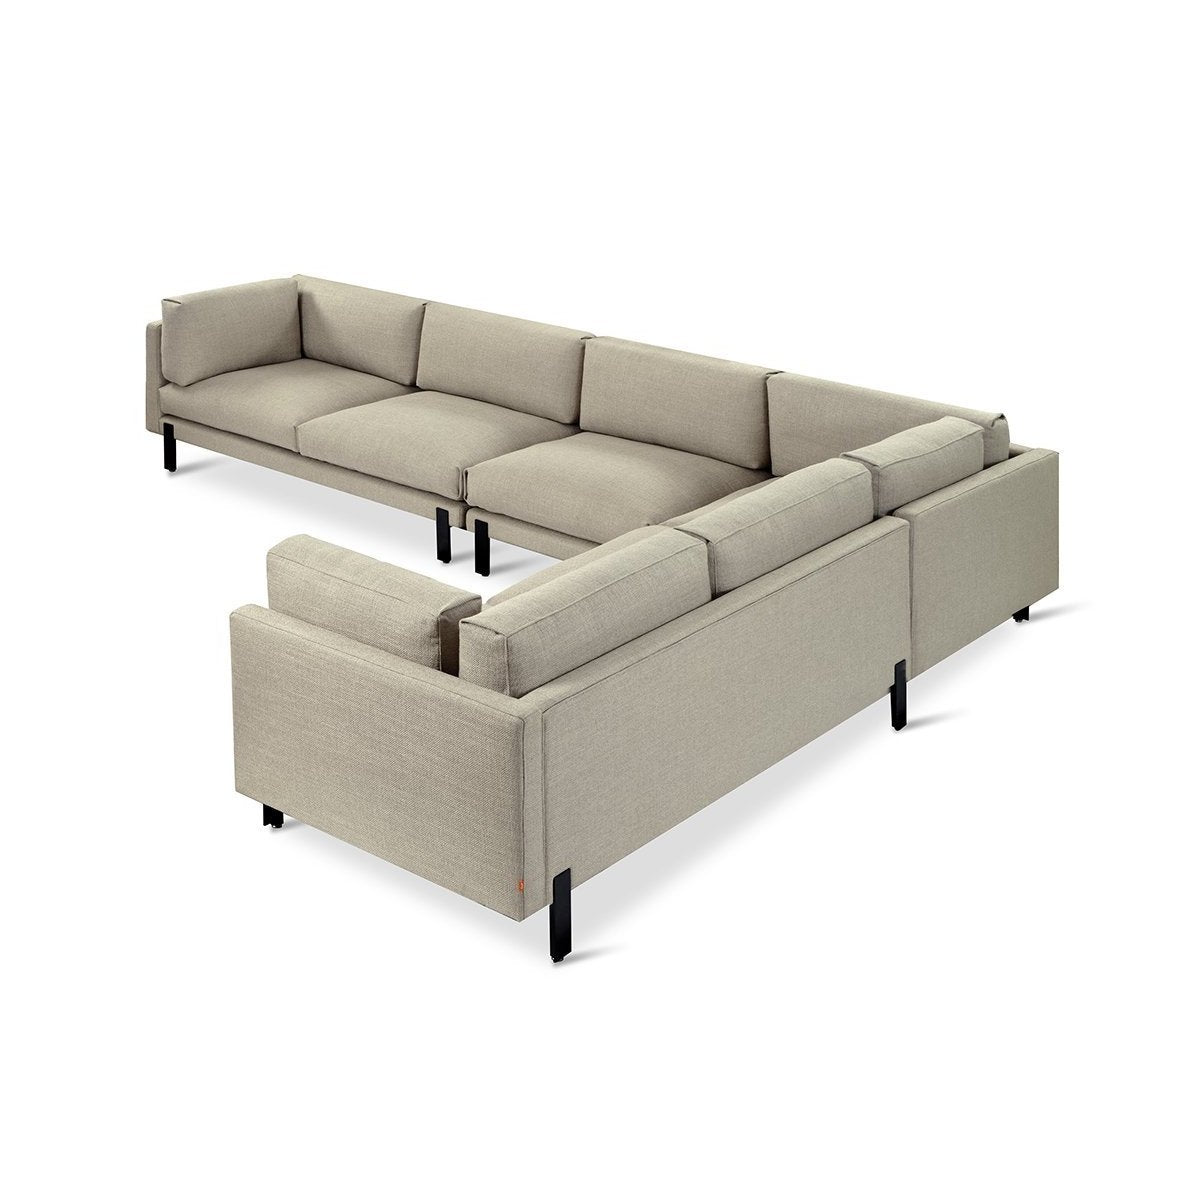 Load image into Gallery viewer, Silverlake XL Sectional Right Facing Andorra AlmondSectional Sofa Gus*  Andorra Almond   Four Hands, Burke Decor, Mid Century Modern Furniture, Old Bones Furniture Company, Old Bones Co, Modern Mid Century, Designer Furniture, https://www.oldbonesco.com/
